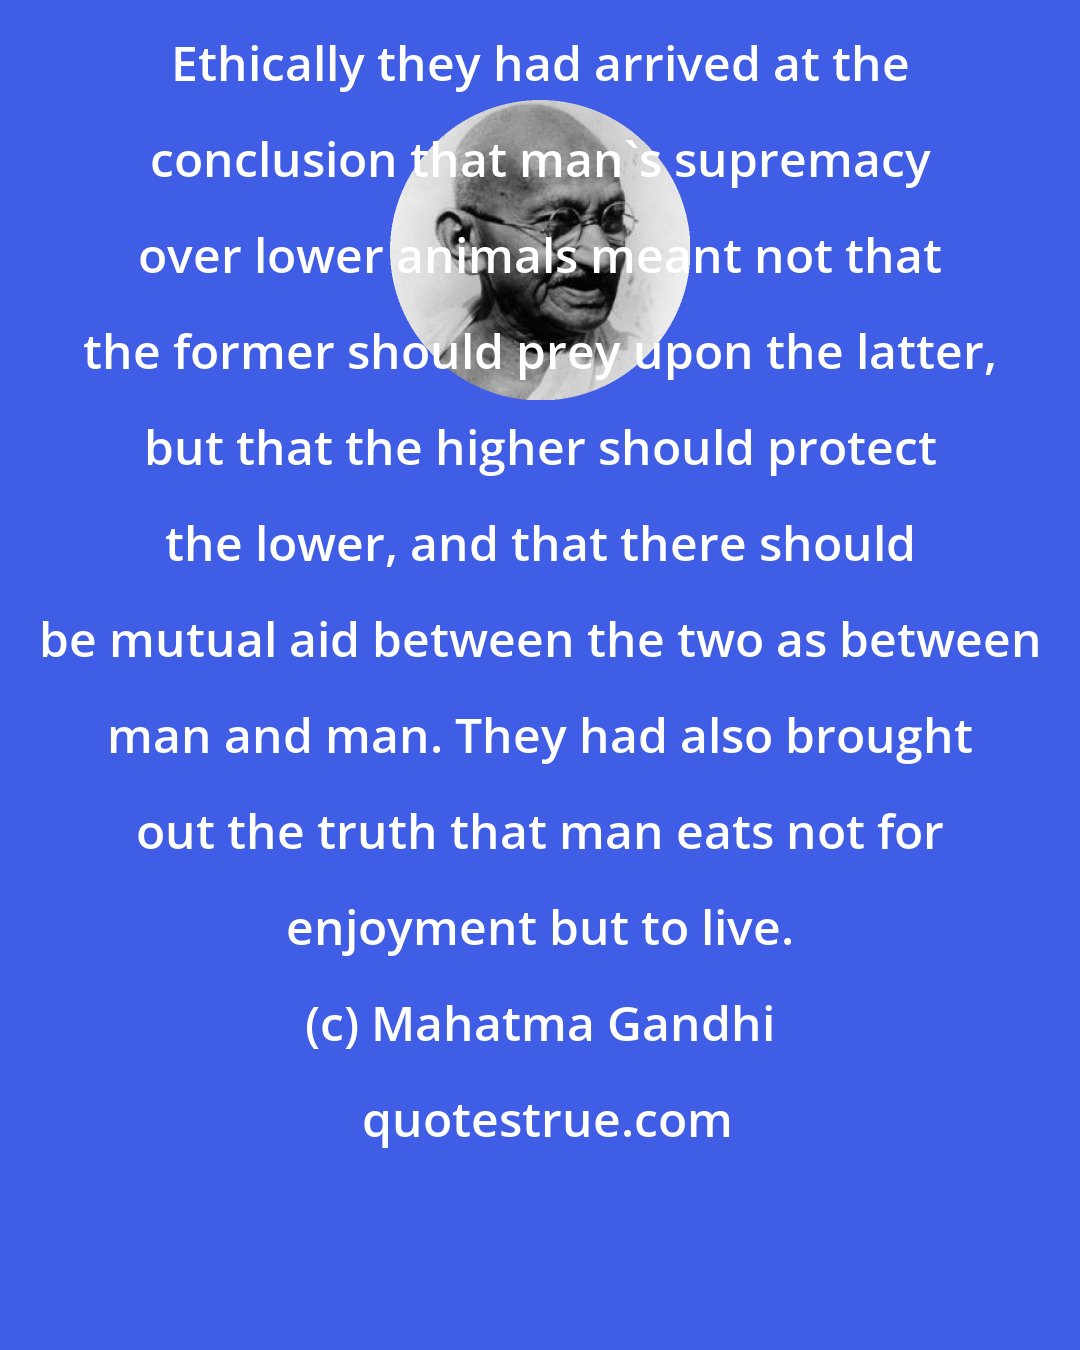 Mahatma Gandhi: Ethically they had arrived at the conclusion that man's supremacy over lower animals meant not that the former should prey upon the latter, but that the higher should protect the lower, and that there should be mutual aid between the two as between man and man. They had also brought out the truth that man eats not for enjoyment but to live.